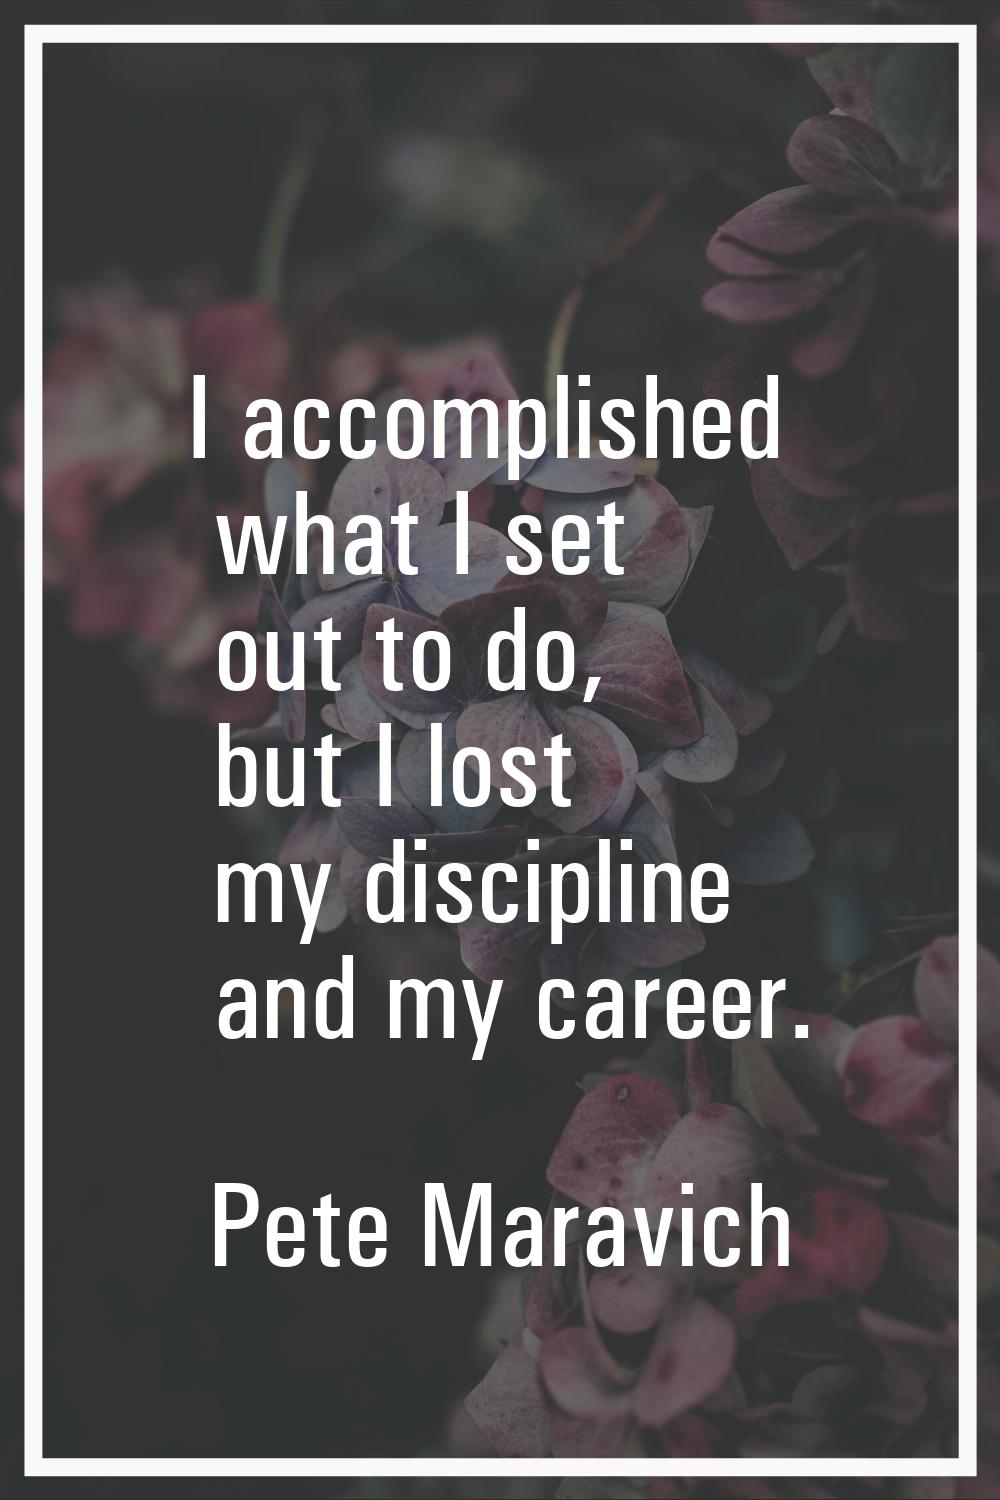 I accomplished what I set out to do, but I lost my discipline and my career.